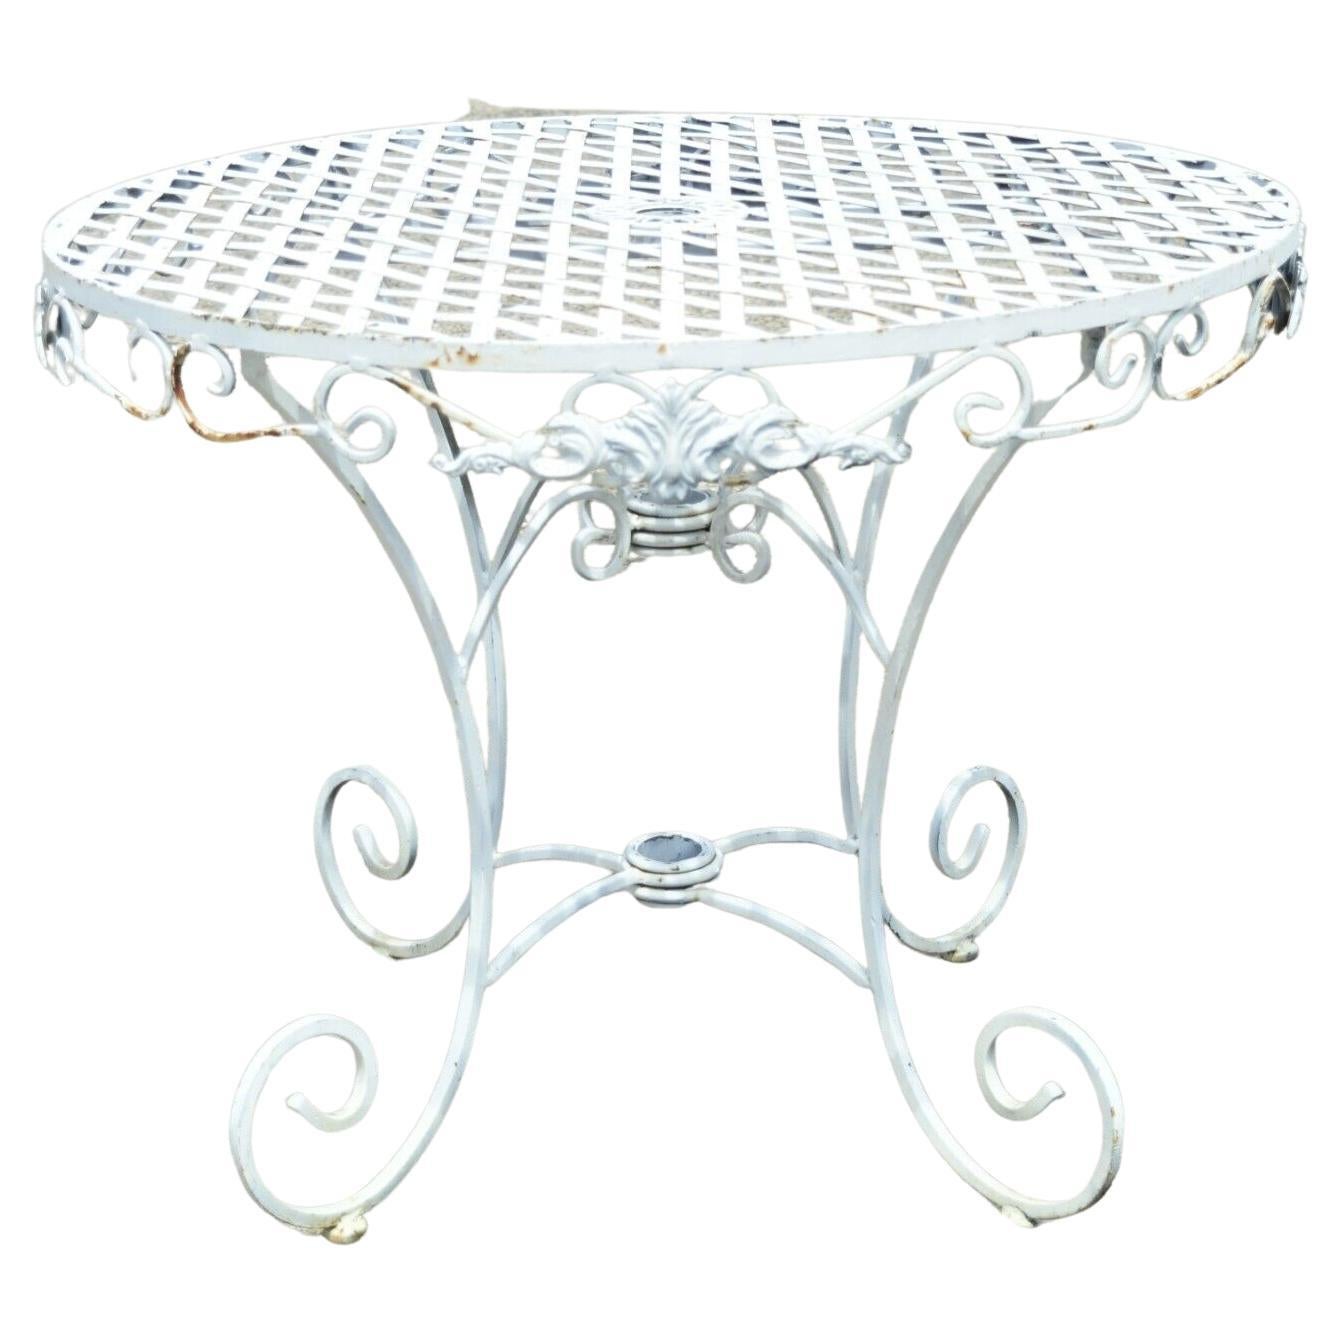 Wrought Iron French Pastry Style Country Lattice Scroll Round Patio Dining Table For Sale